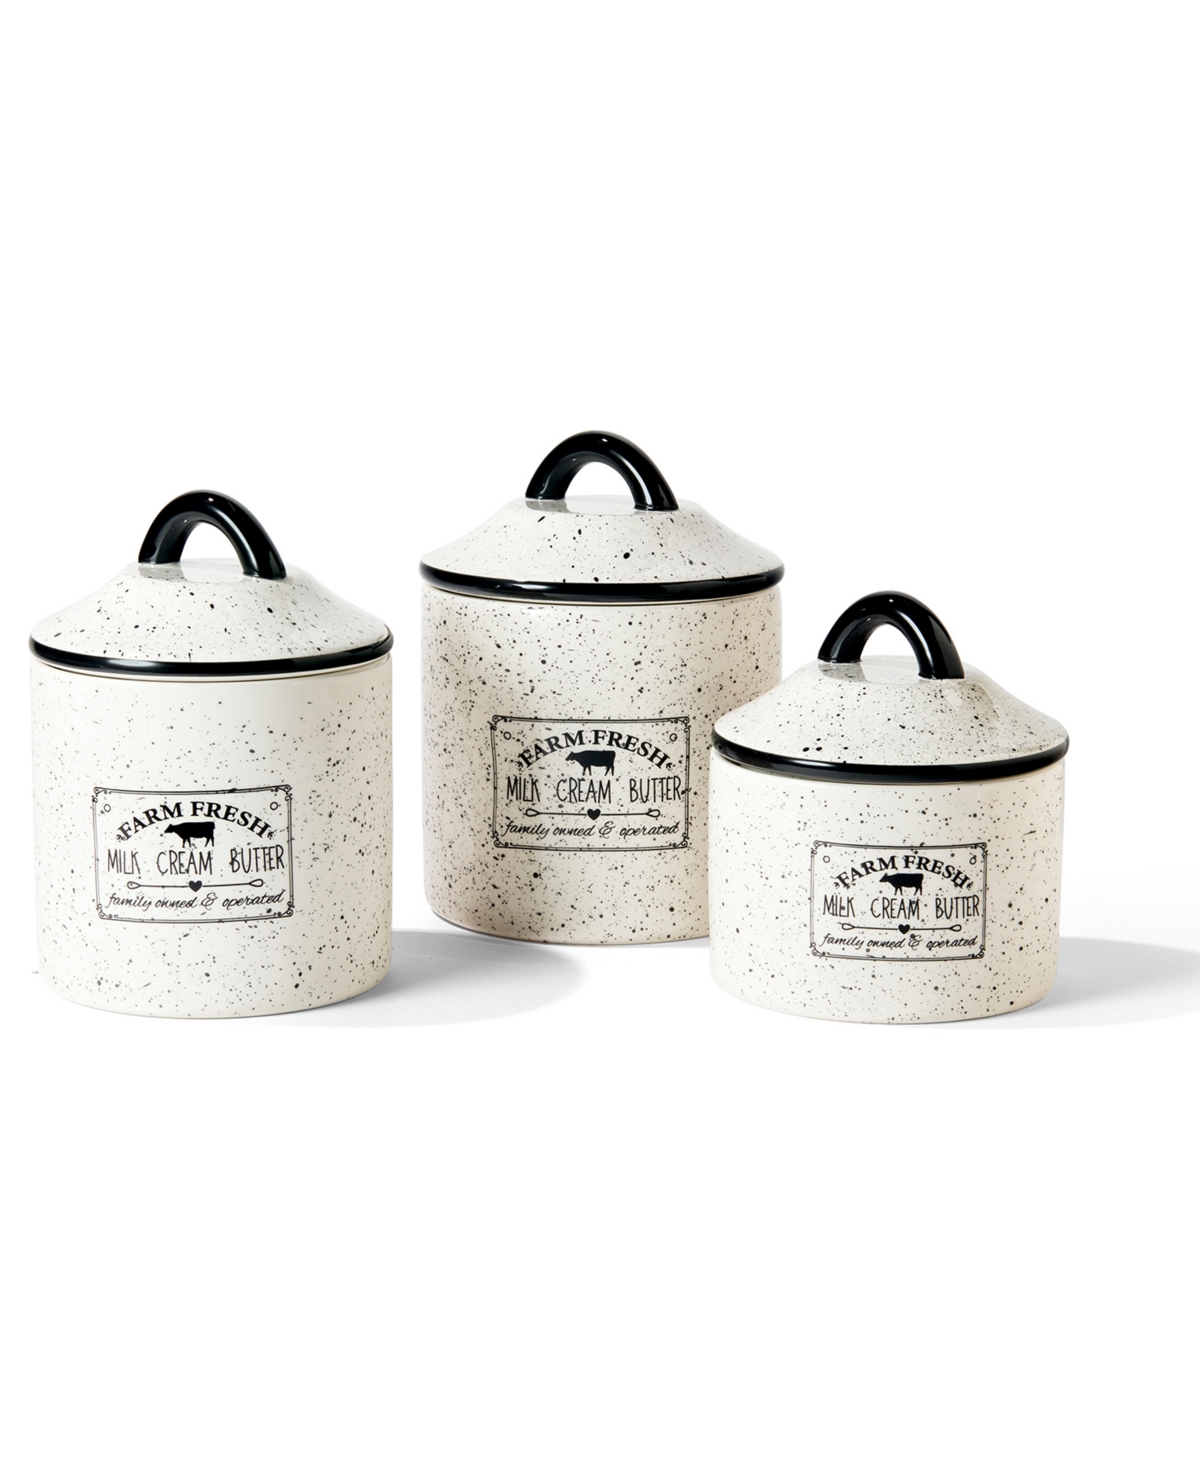 Jay Imports Farm Fresh 3 Piece Canister Set In White